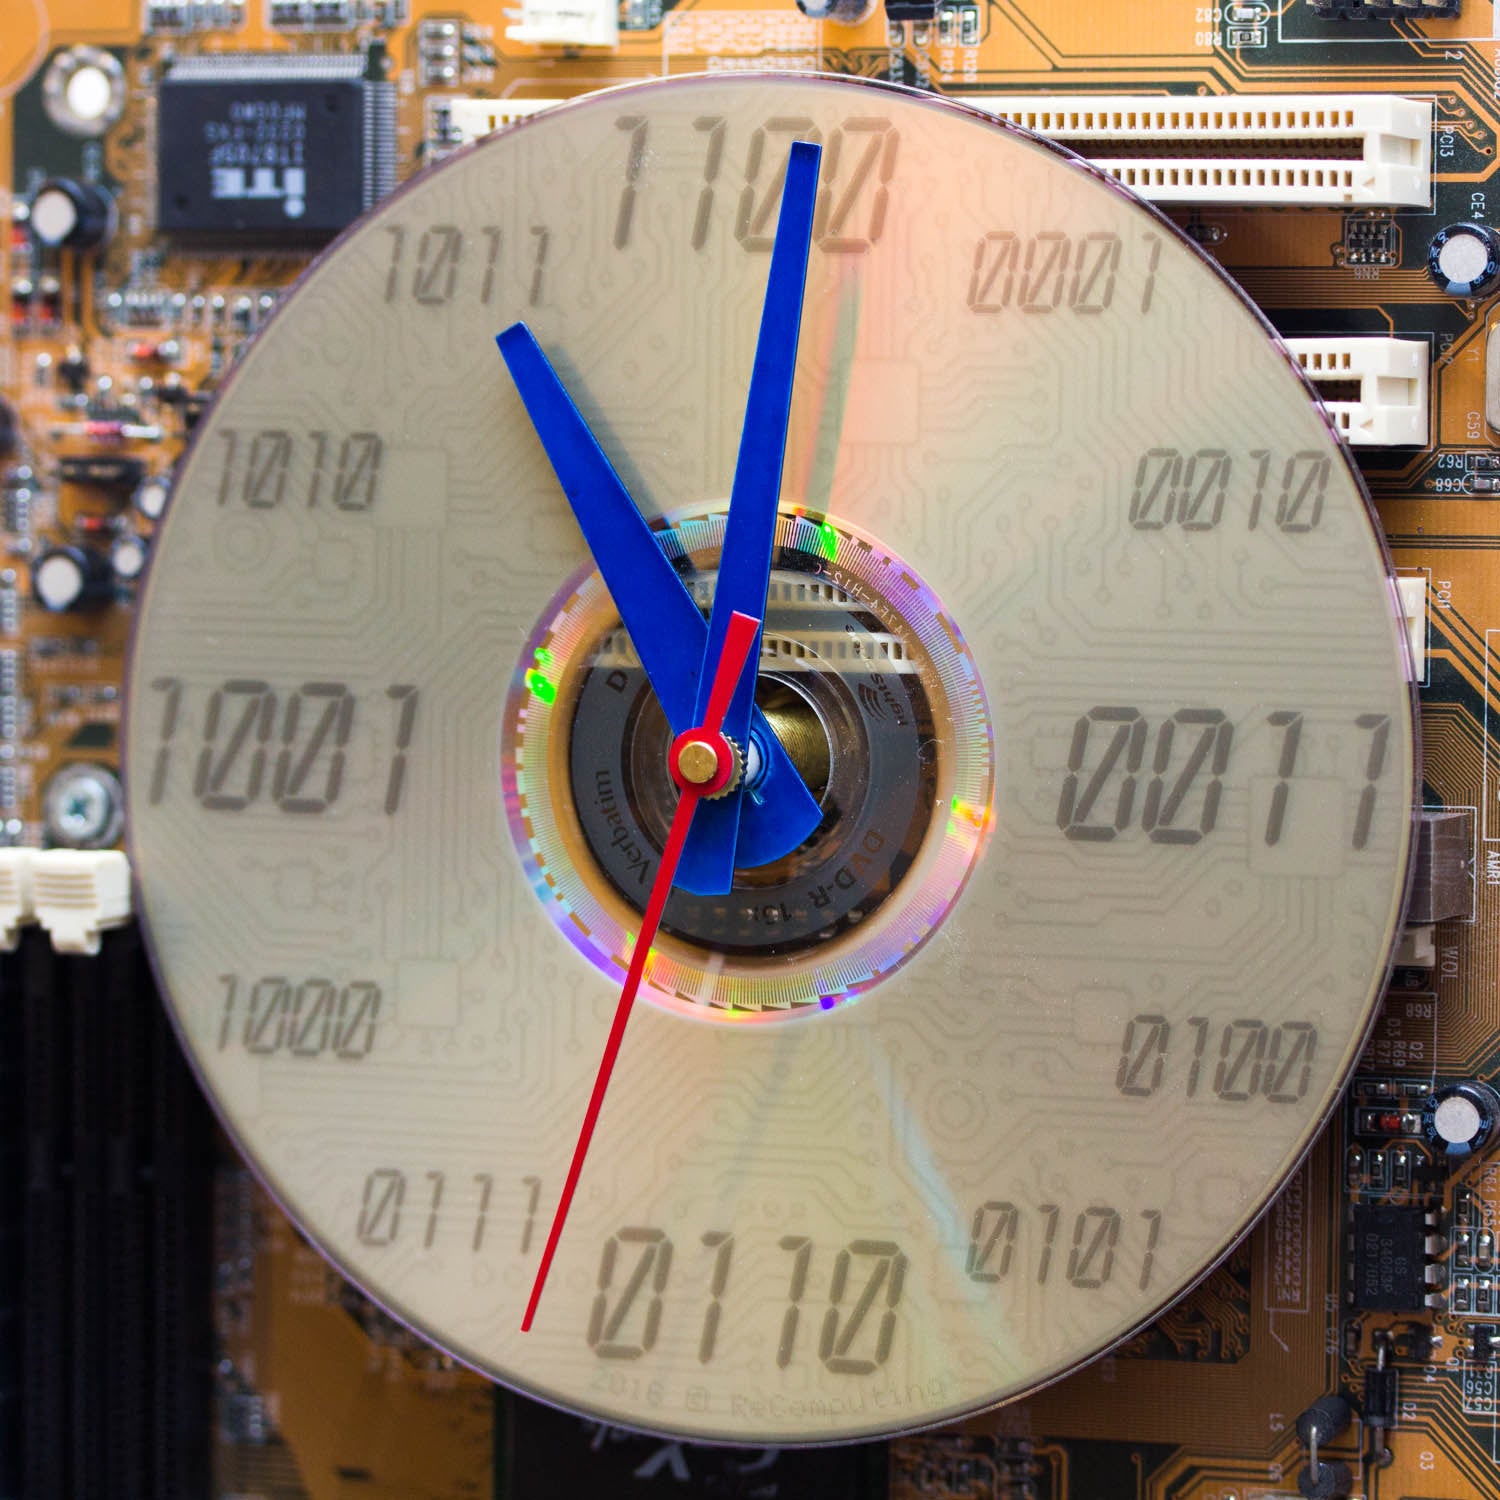 Techie Clock made of yellow / olive green circuit board